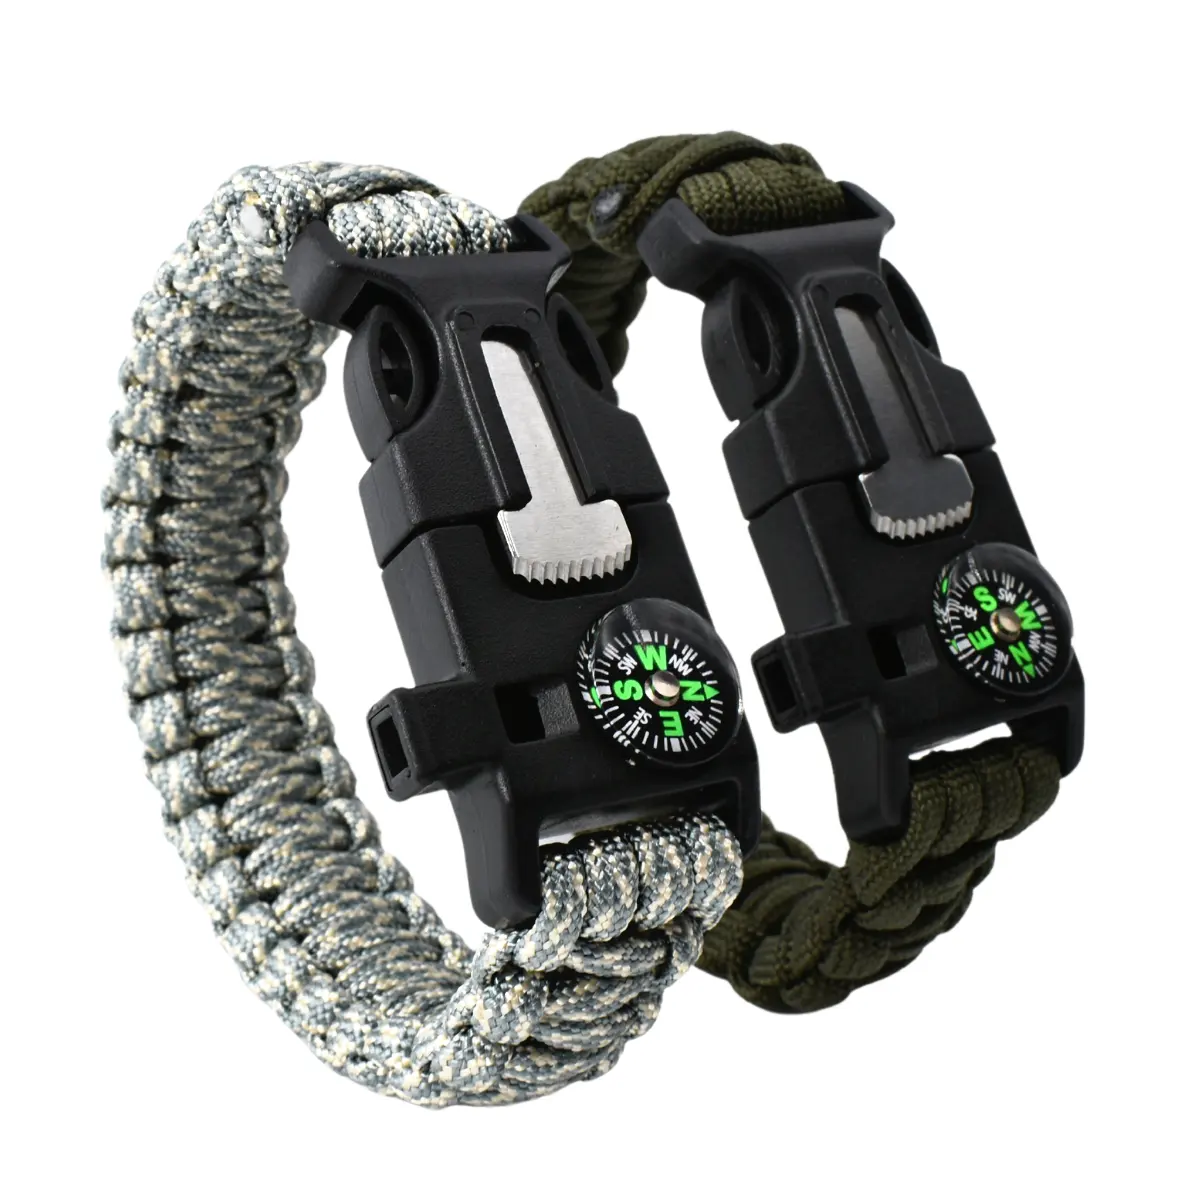 Anthrive Factory OEM Tactical Camping Accessories Survival Parachute cord Bracelets with Flint Fire Starter Whistle Compass